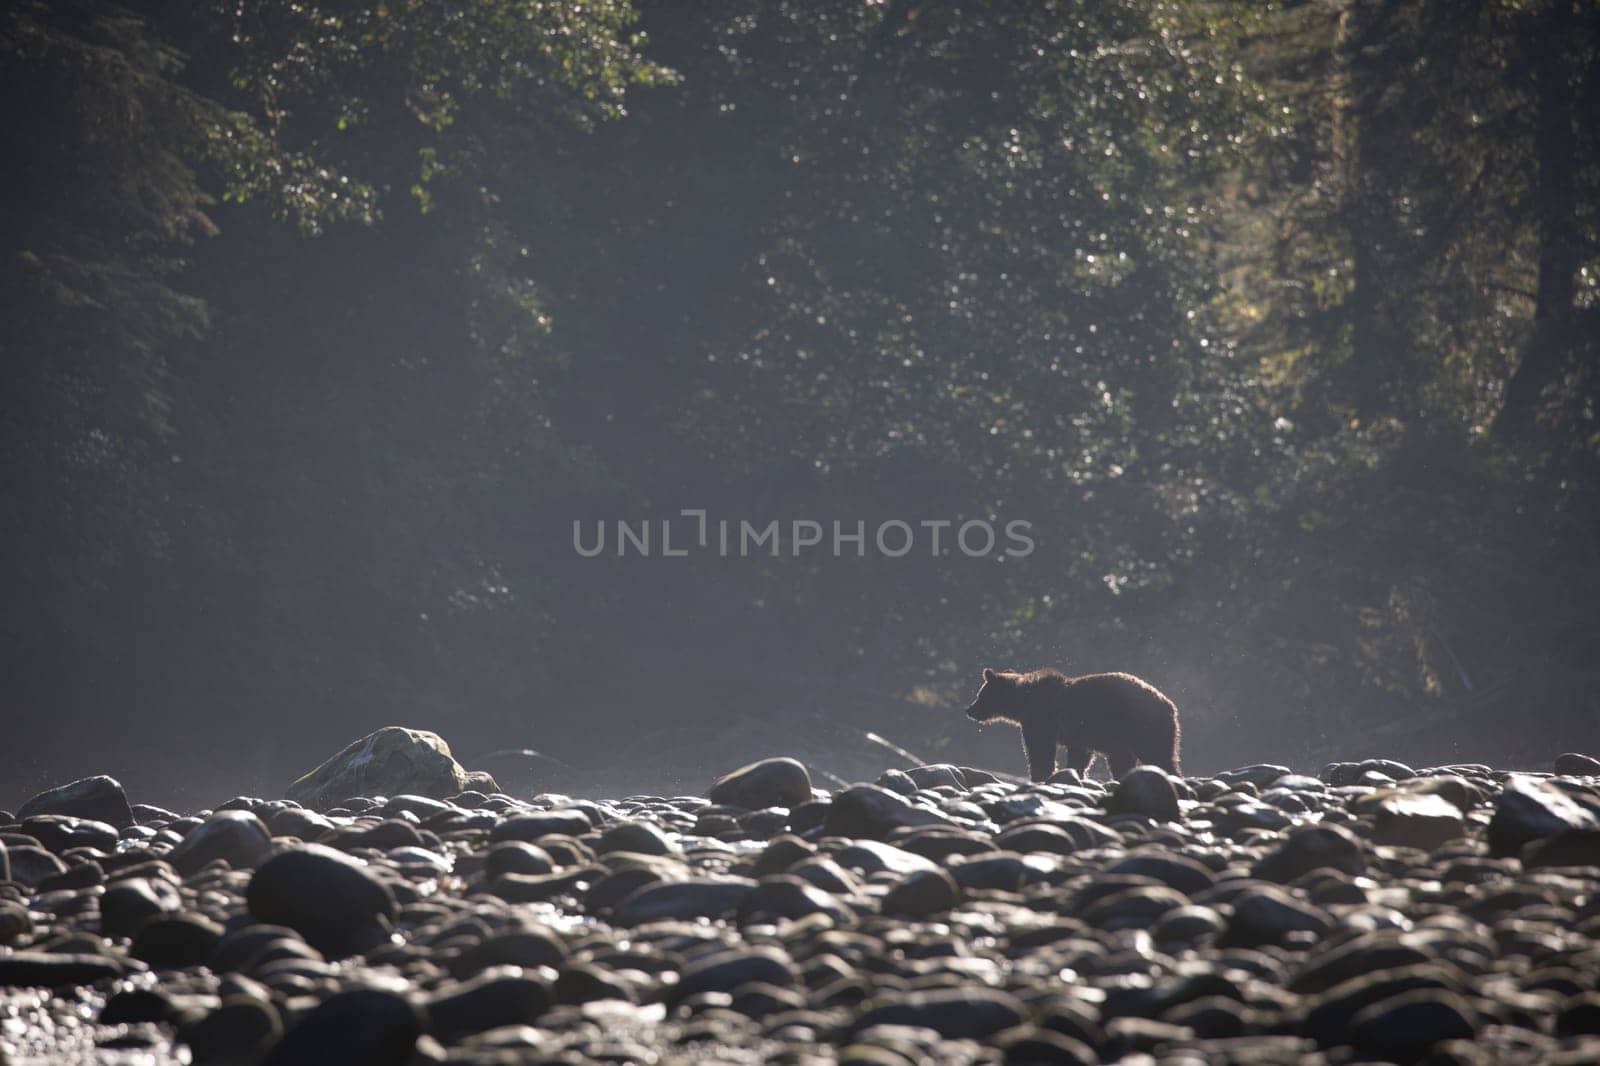 A young grizzly bear searching for food along a rocky river bank by Granchinho